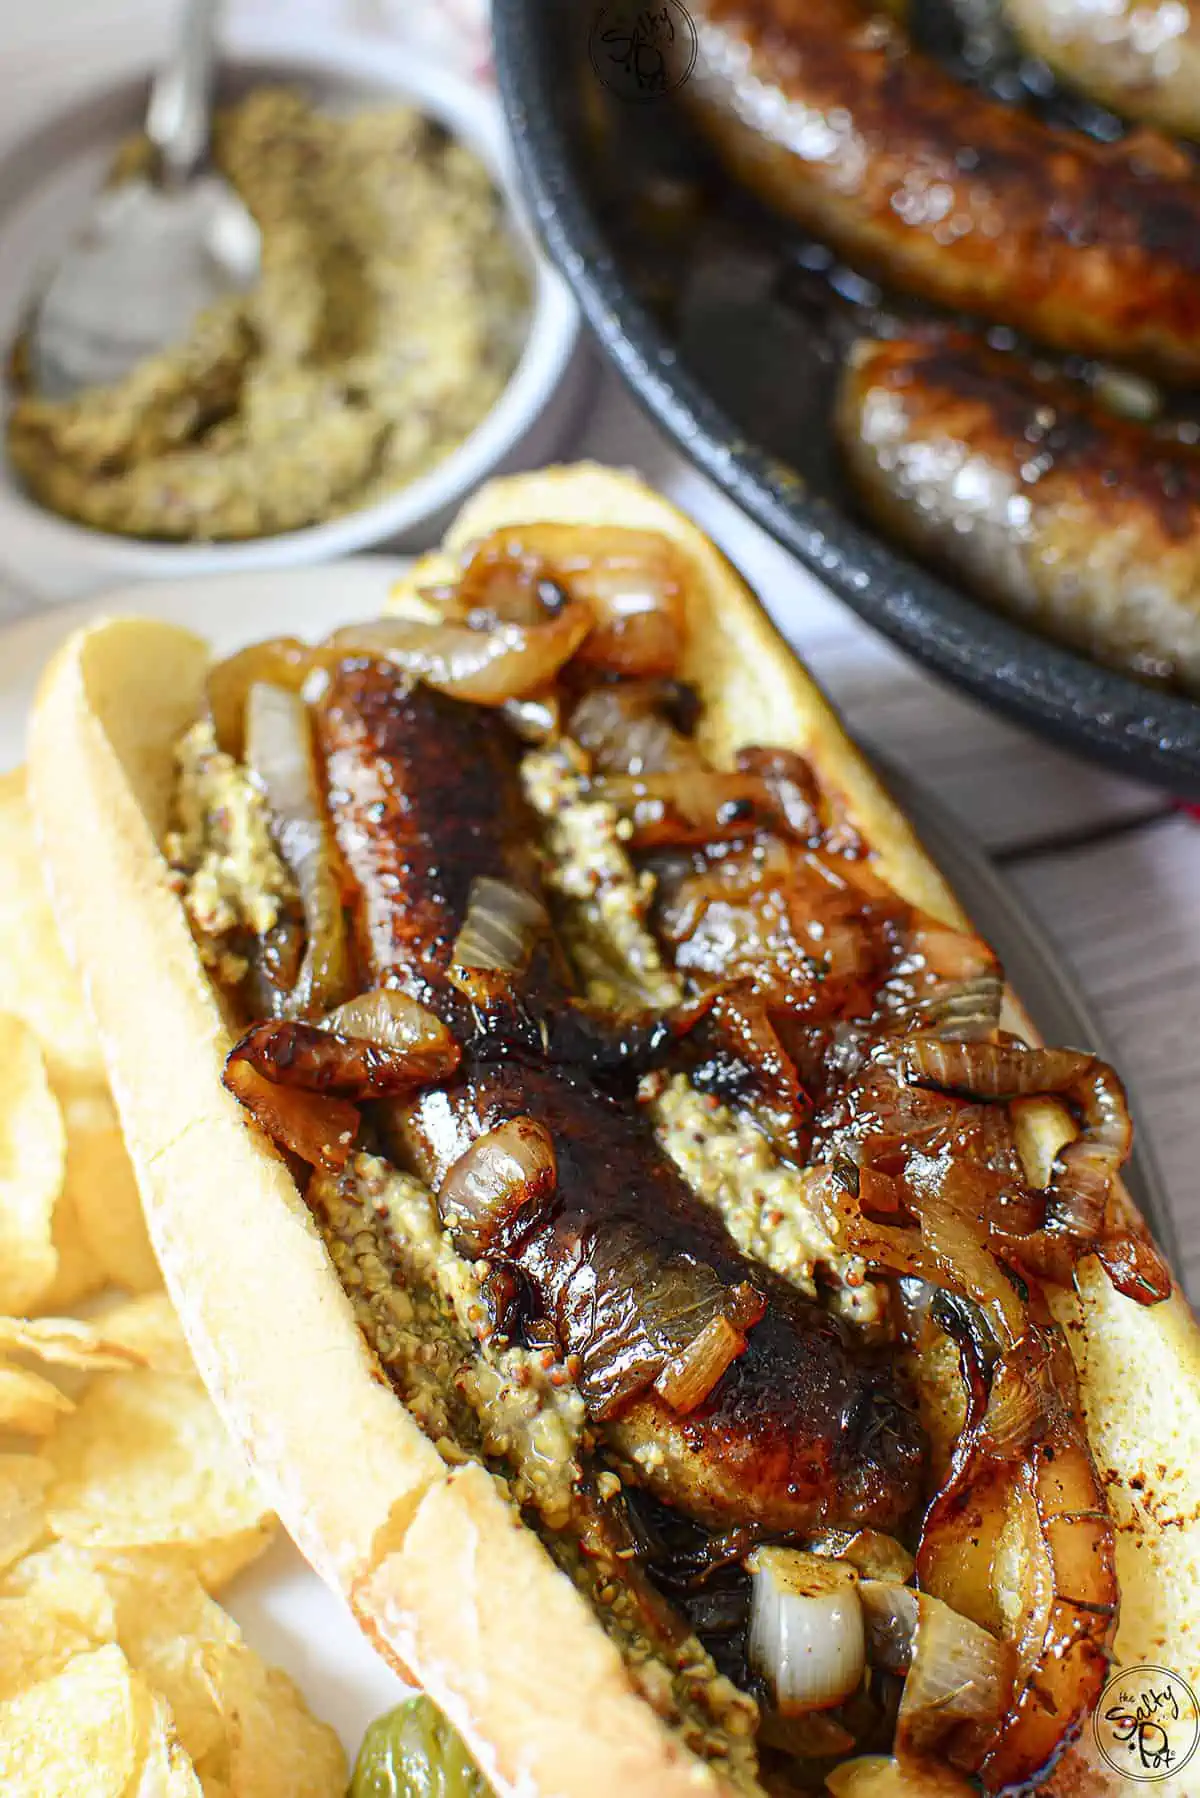 A brat in a bun with onions and condiments. In the background are more brats in a pan.